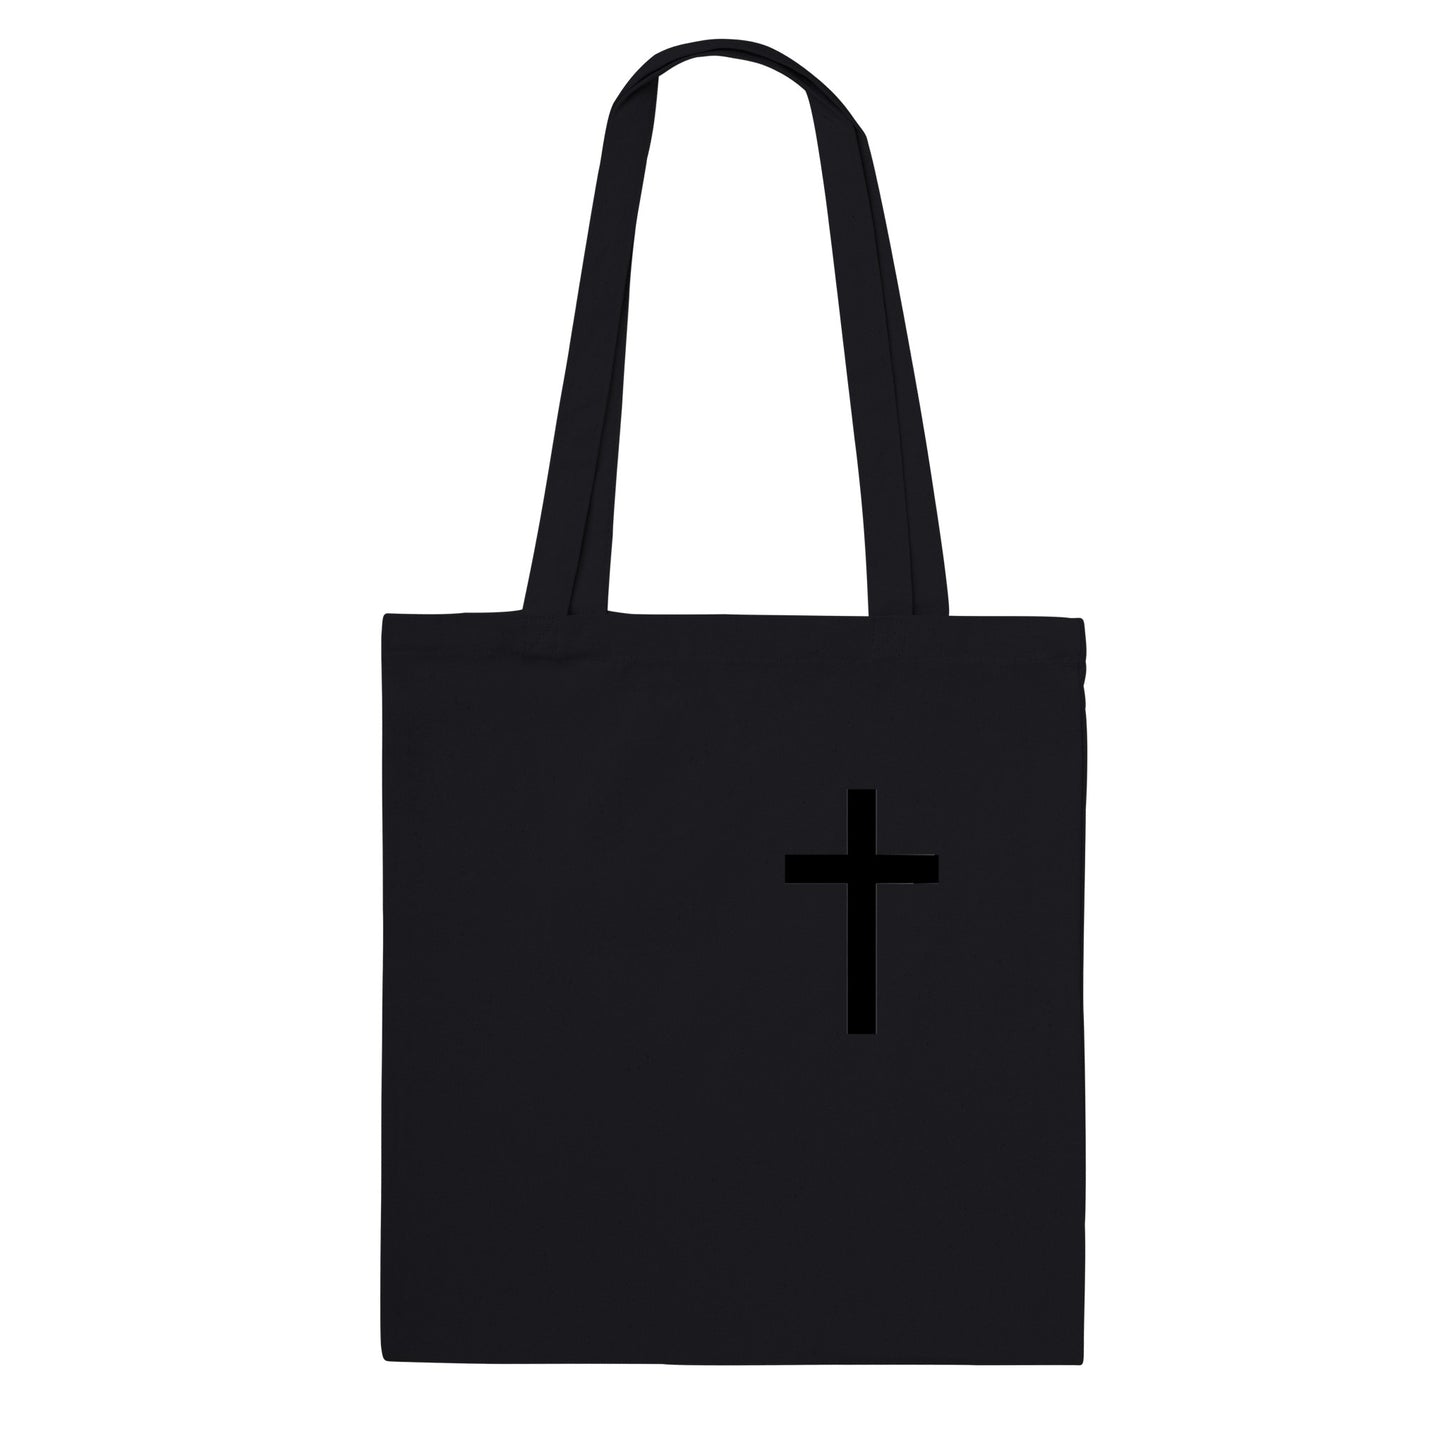 Christian Cross / Everyday is a Fresh Start - Classic Tote Bag